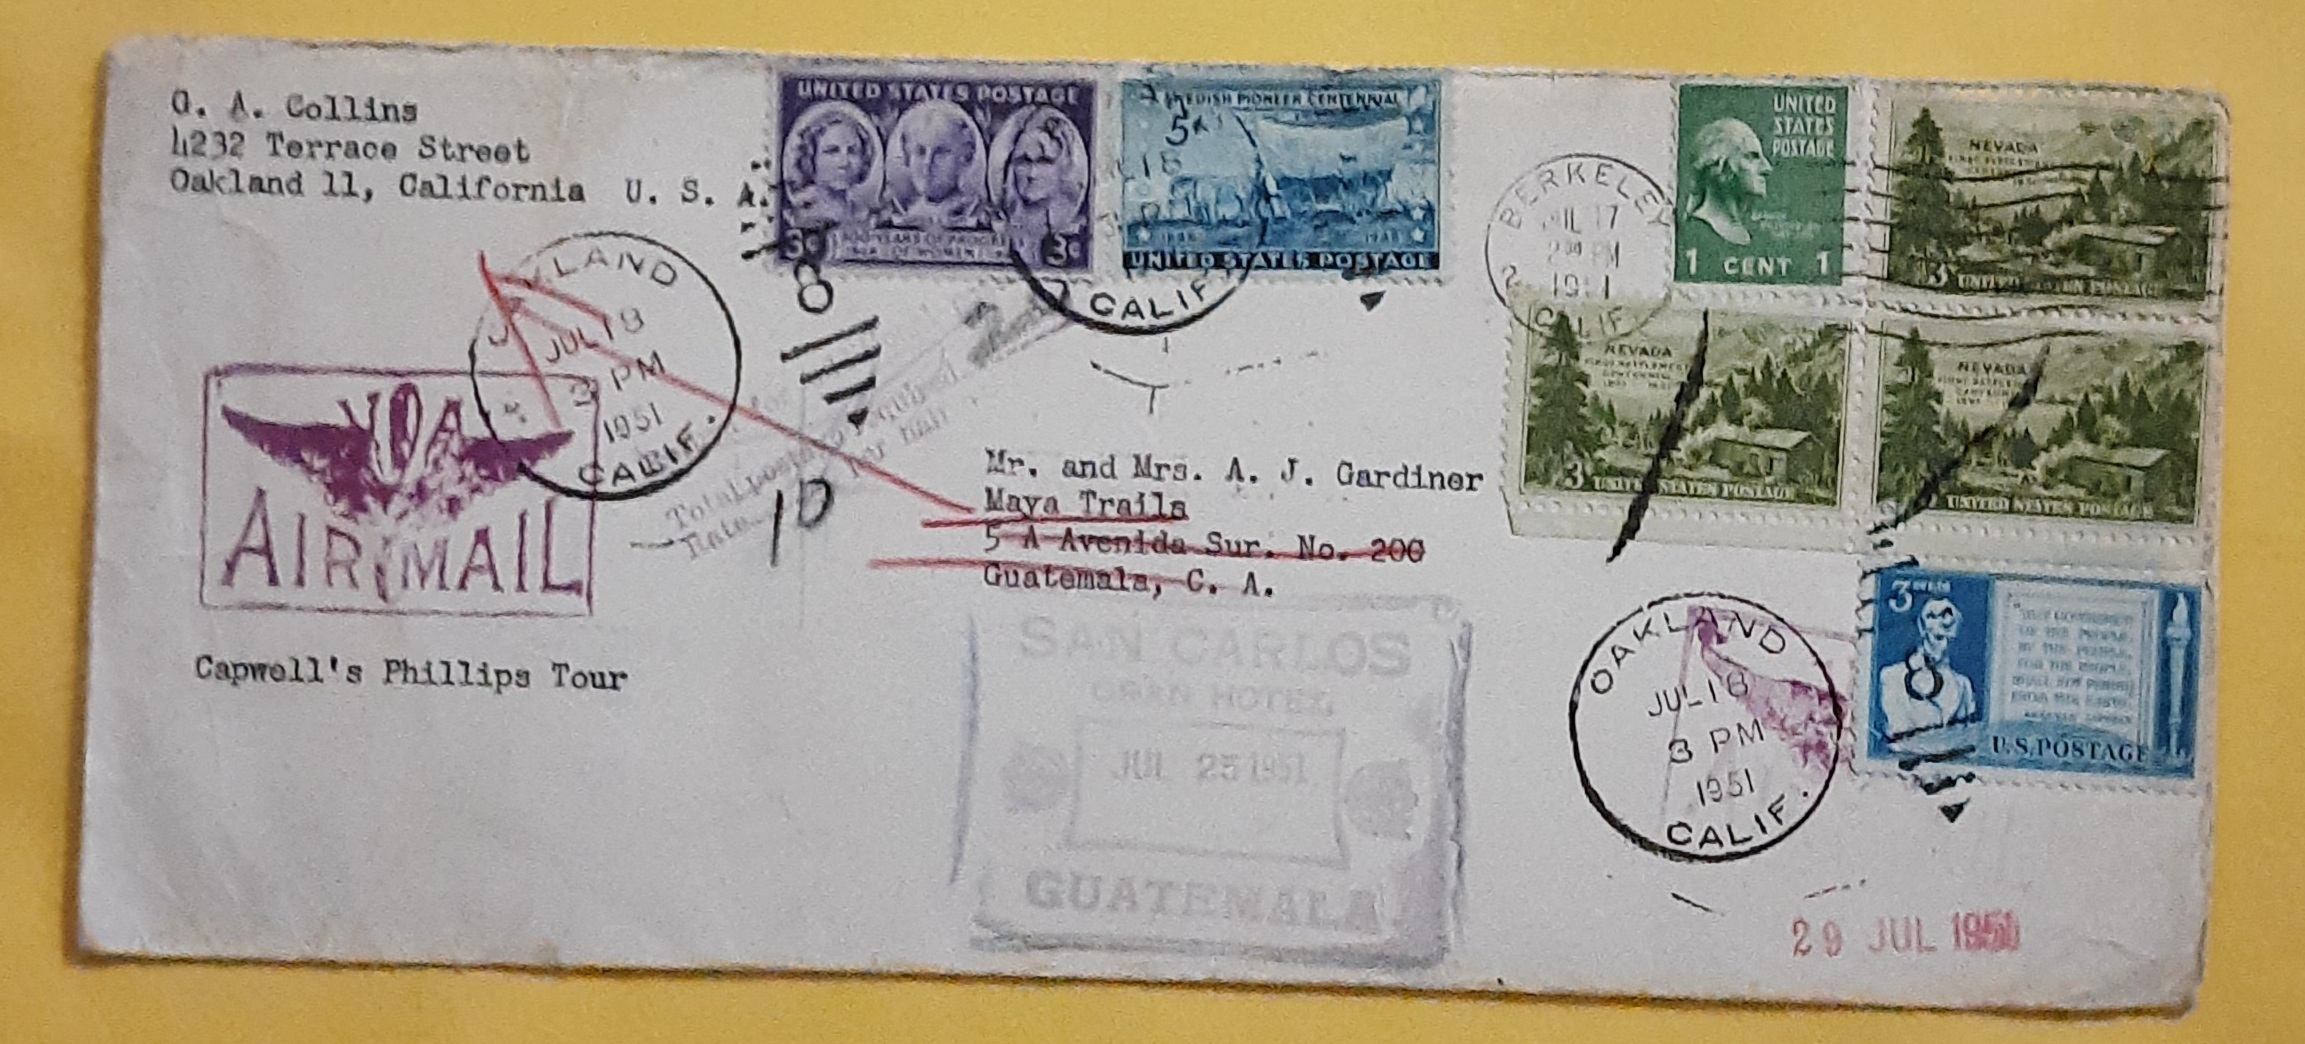 1951 AIR MAIL USED COVER FROM CALIFORNIA TO GUATEMALA SEAL ON THE COVER  HOTEL SAN CARLOS